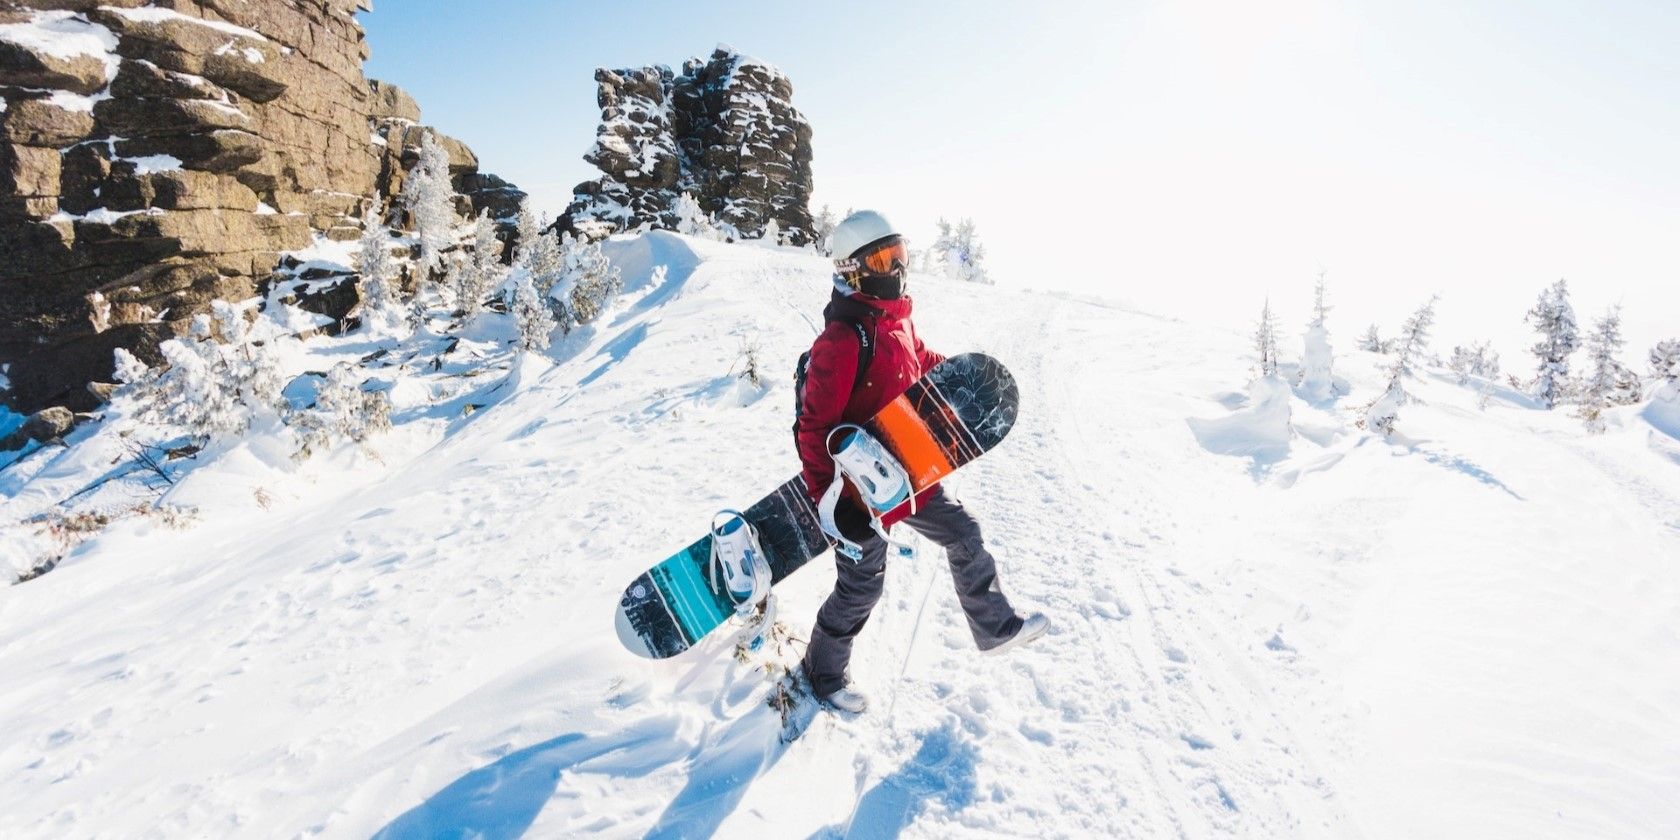 How to get fit for snowboarding